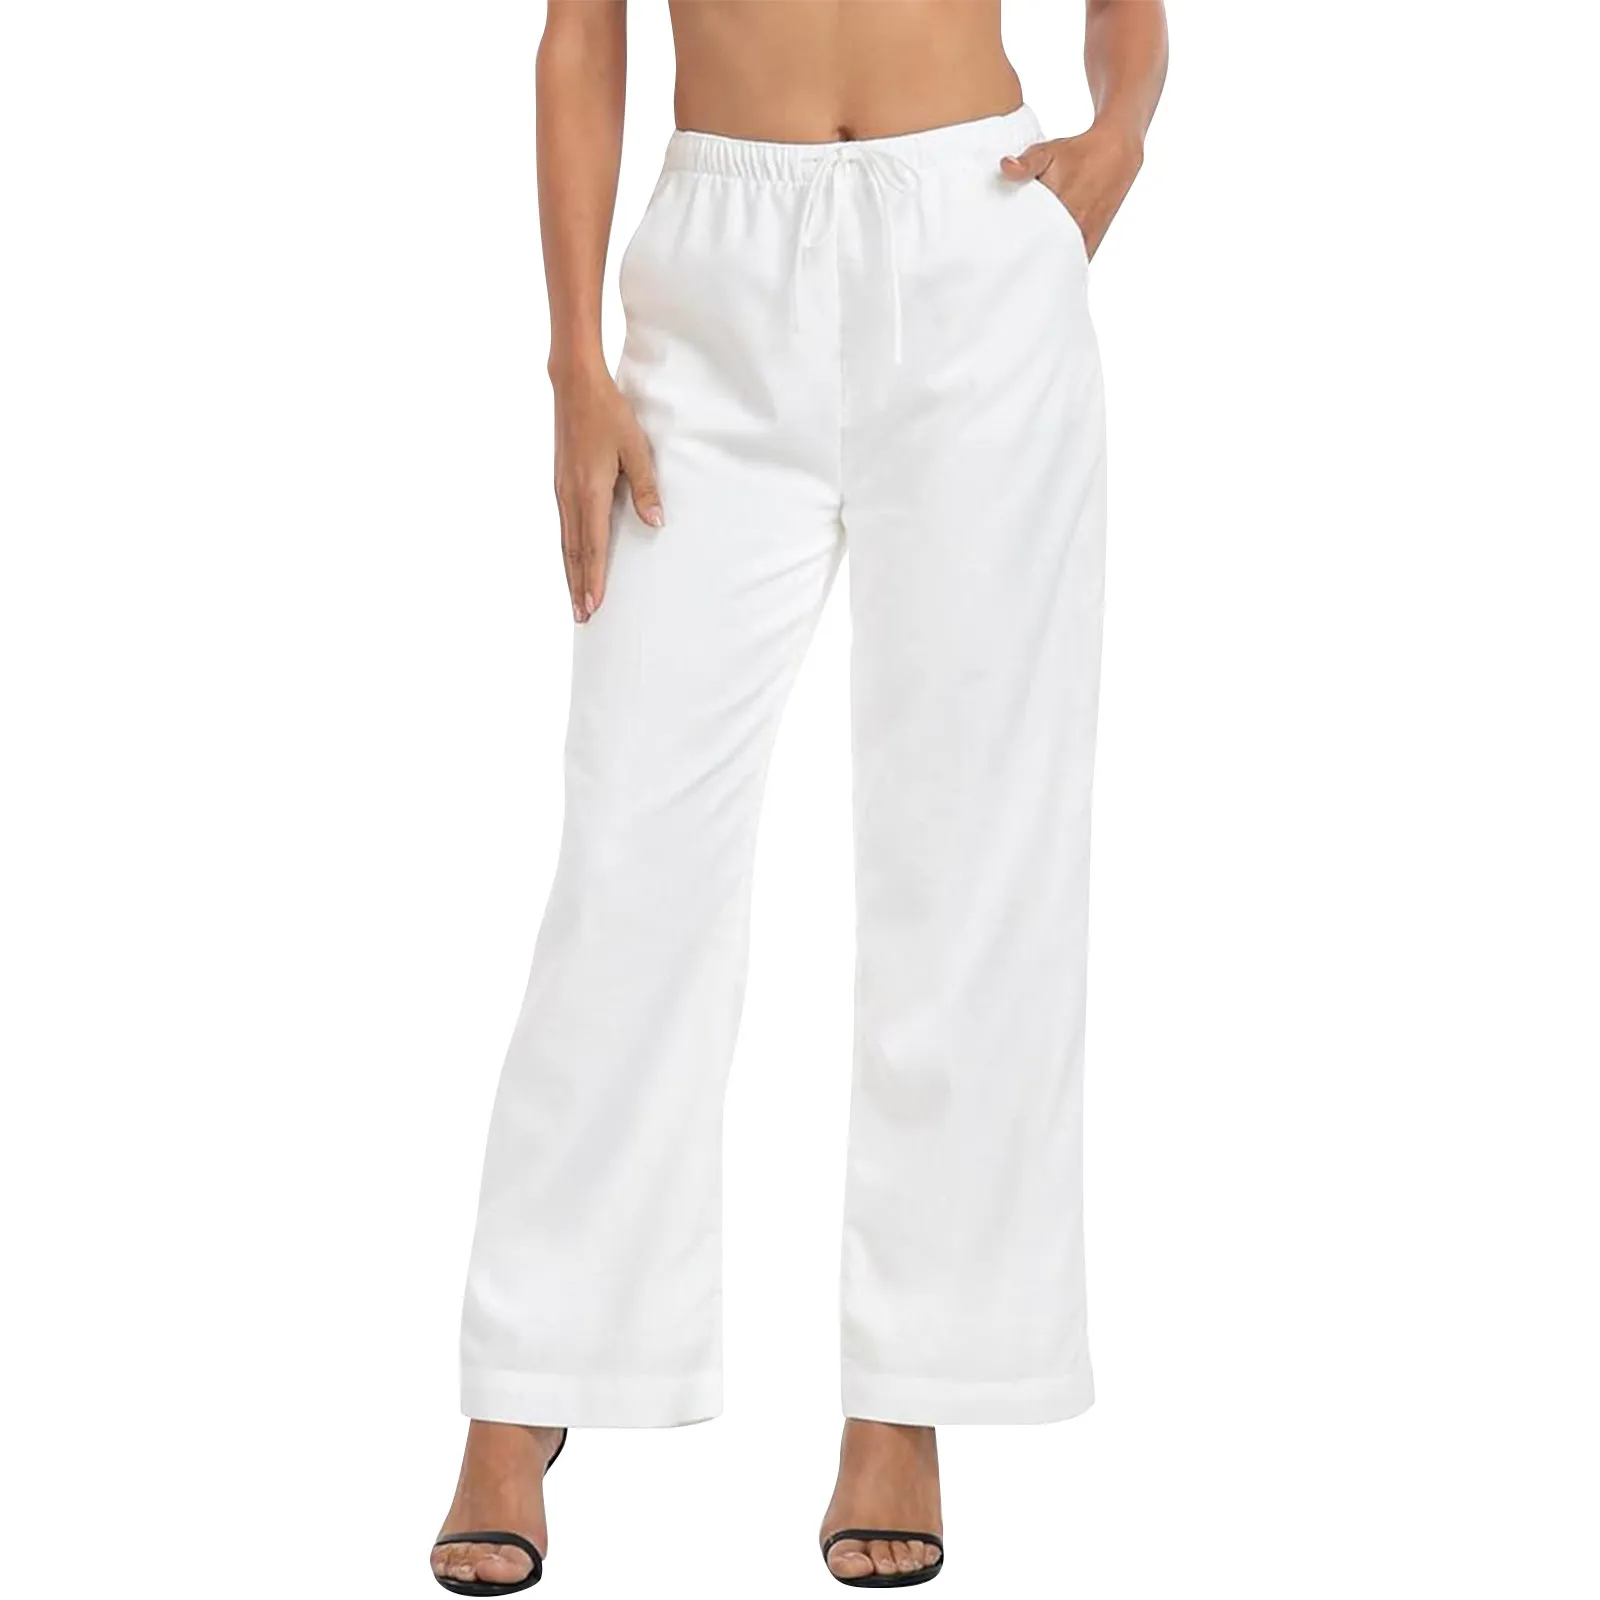 

Women's Cotton And Linen Trousers Summer Wide-Legged Casual Loose High-Waisted Wide-Leg Trousers With Pockets 한국인 리뷰 많은 옷 봄